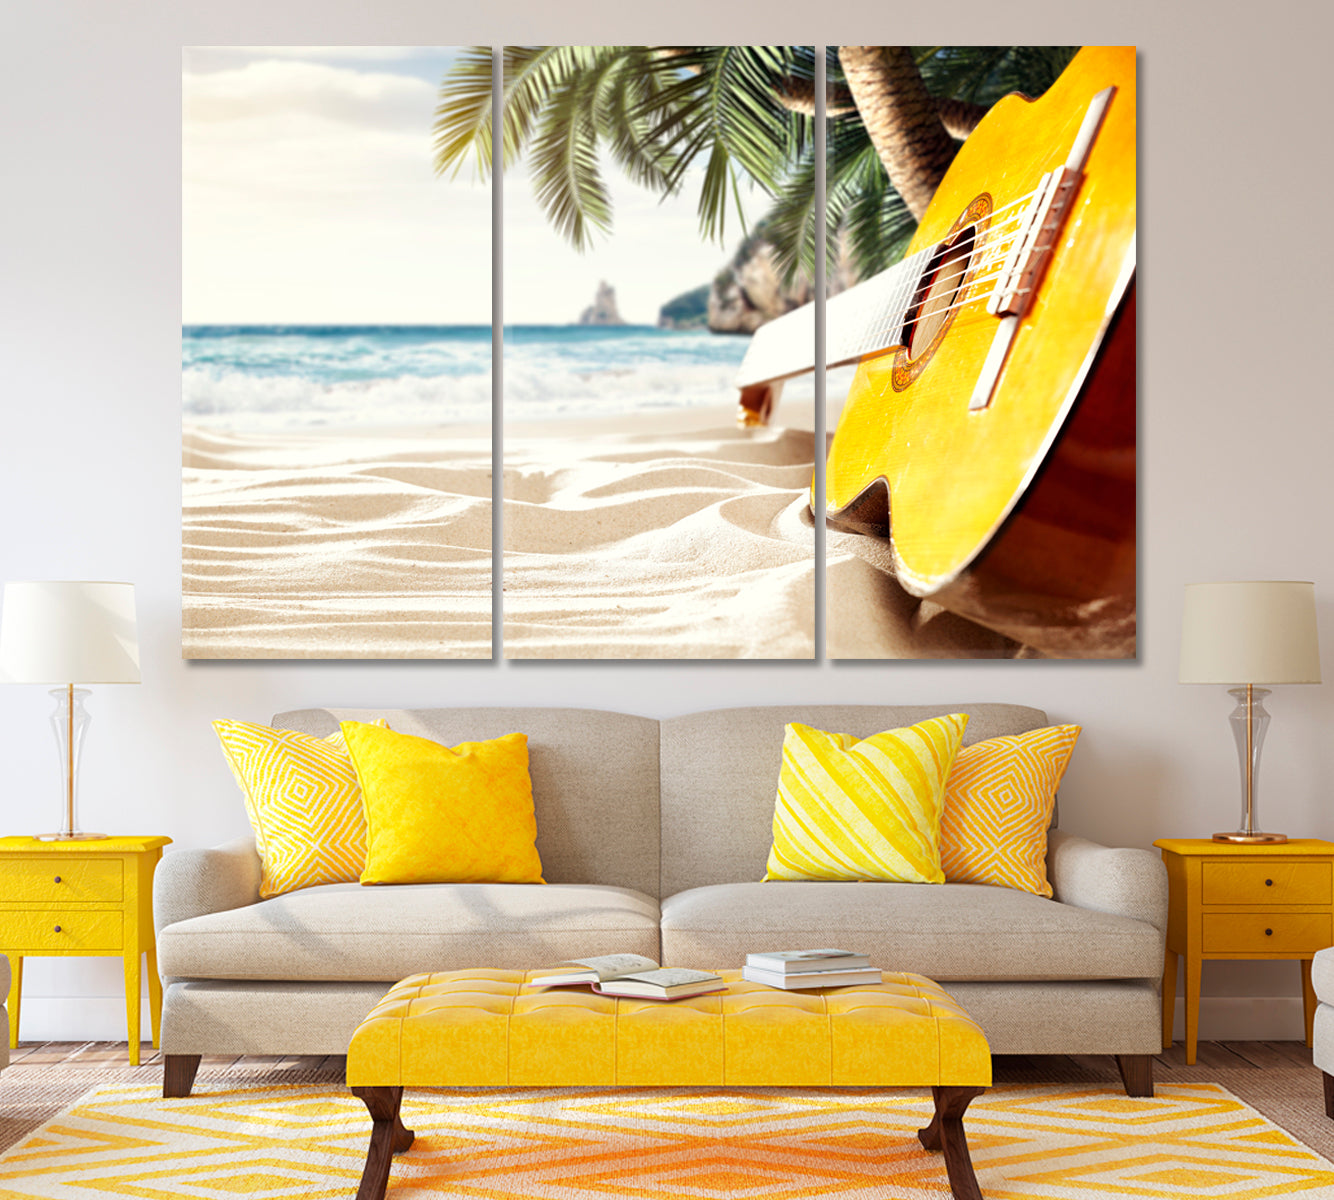 Guitar on the Sand Beach Canvas Print ArtLexy 3 Panels 36"x24" inches 